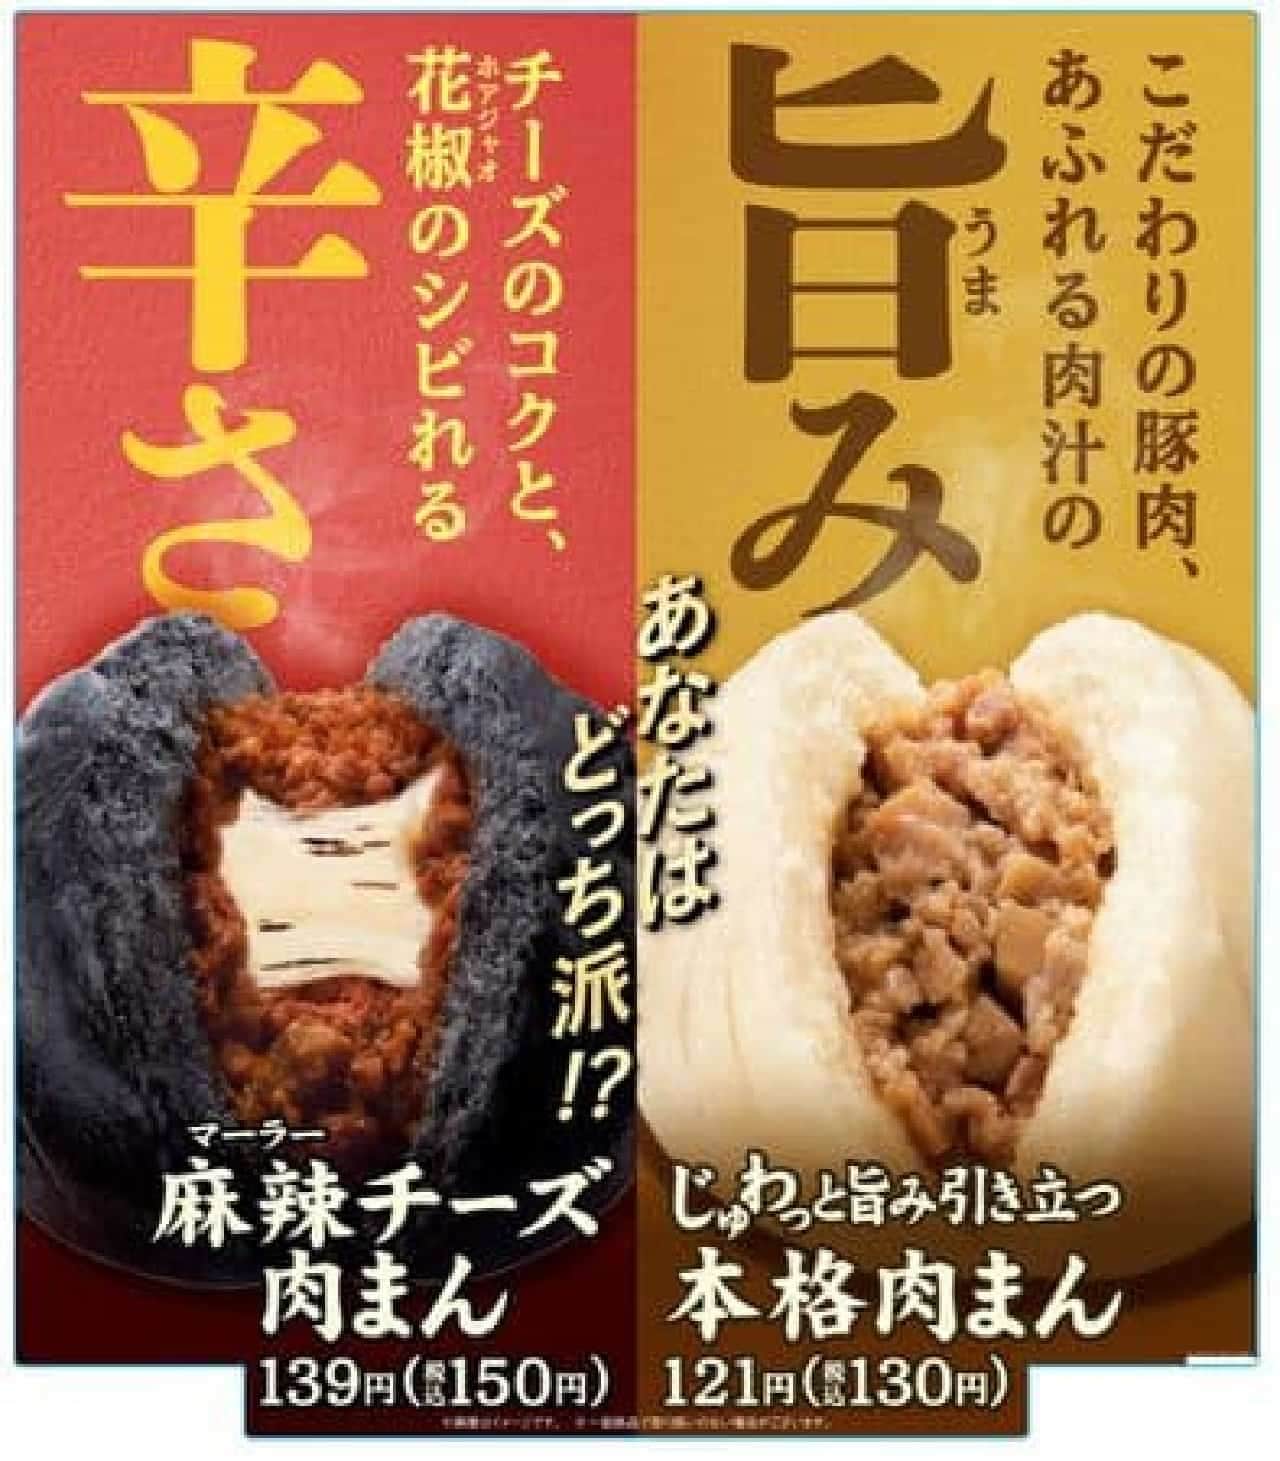 FamilyMart's Chinese steamed bun "Mala cheese meat bun" and "Authentic meat bun"